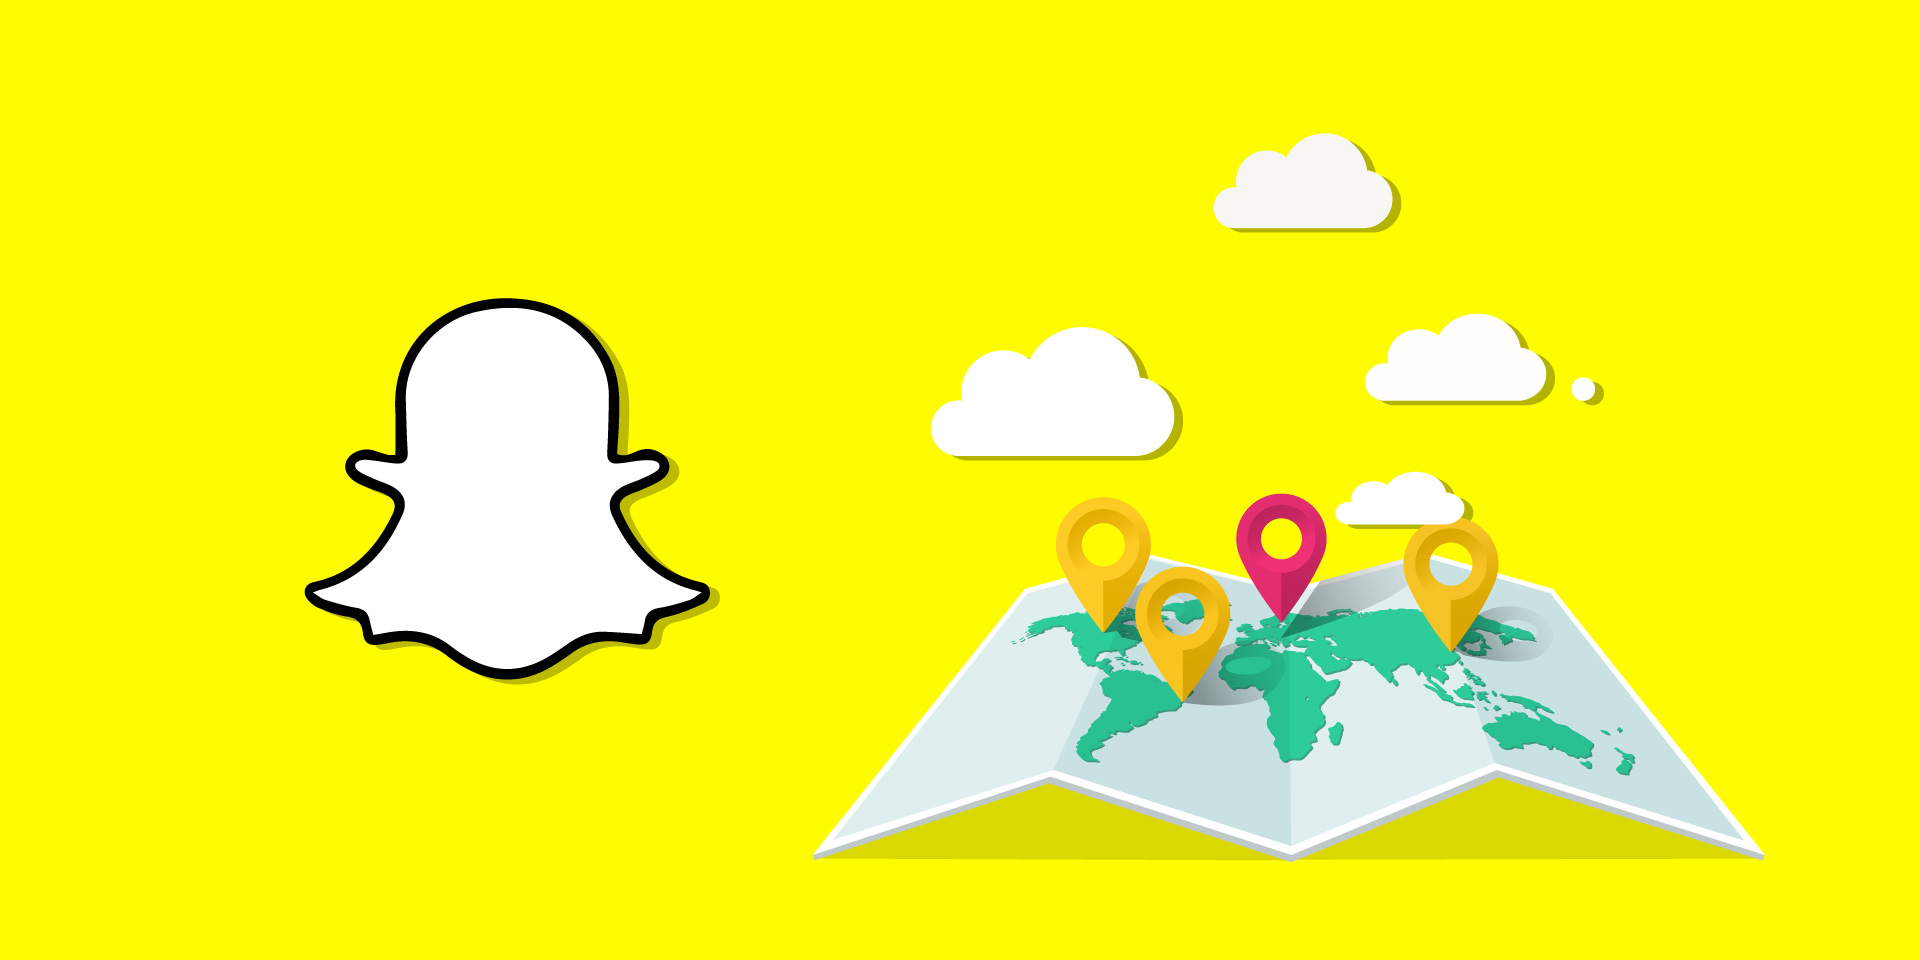 Snapchat has introduced Snap Map to let you share your location